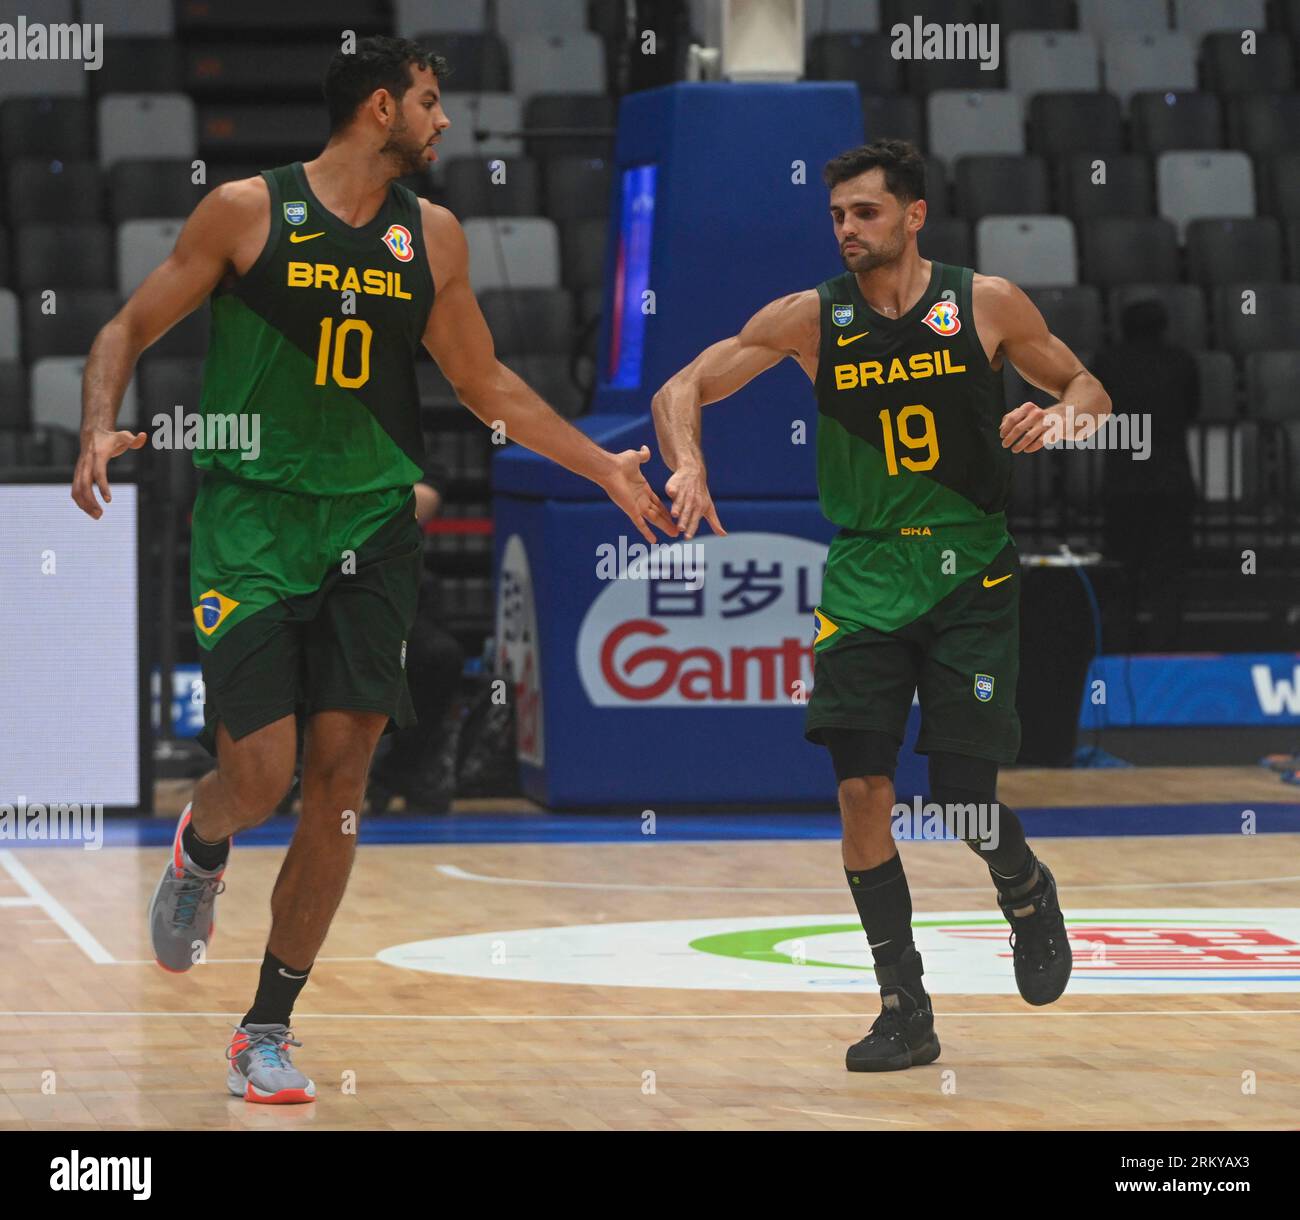 Jakarta, Indonesia. 26th Aug, 2023. Raul Neto Togni (R) and Tim Soares of Brazil clap hands during the Group G first round match between Iran and Brazil at the FIBA World Cup 2023 in Jakarta, Indonesia, Aug. 26, 2023. Credit: Zulkarnain/Xinhua/Alamy Live News Stock Photo